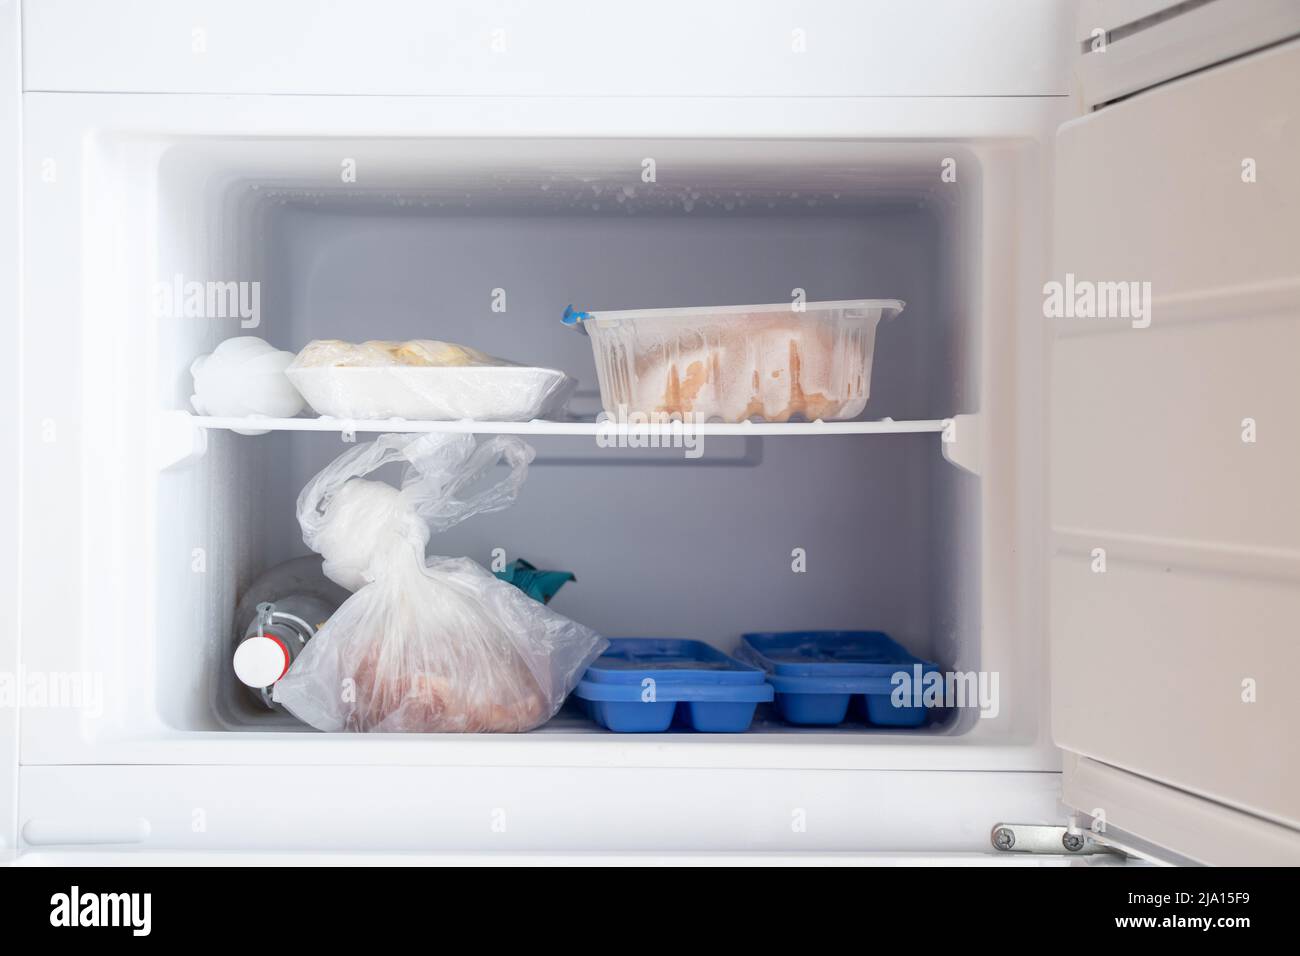 Freezer in the refrigerator, inside a tray with ice and meat and a bottle of vodka, food in the freezer in the kitchen at home Stock Photo